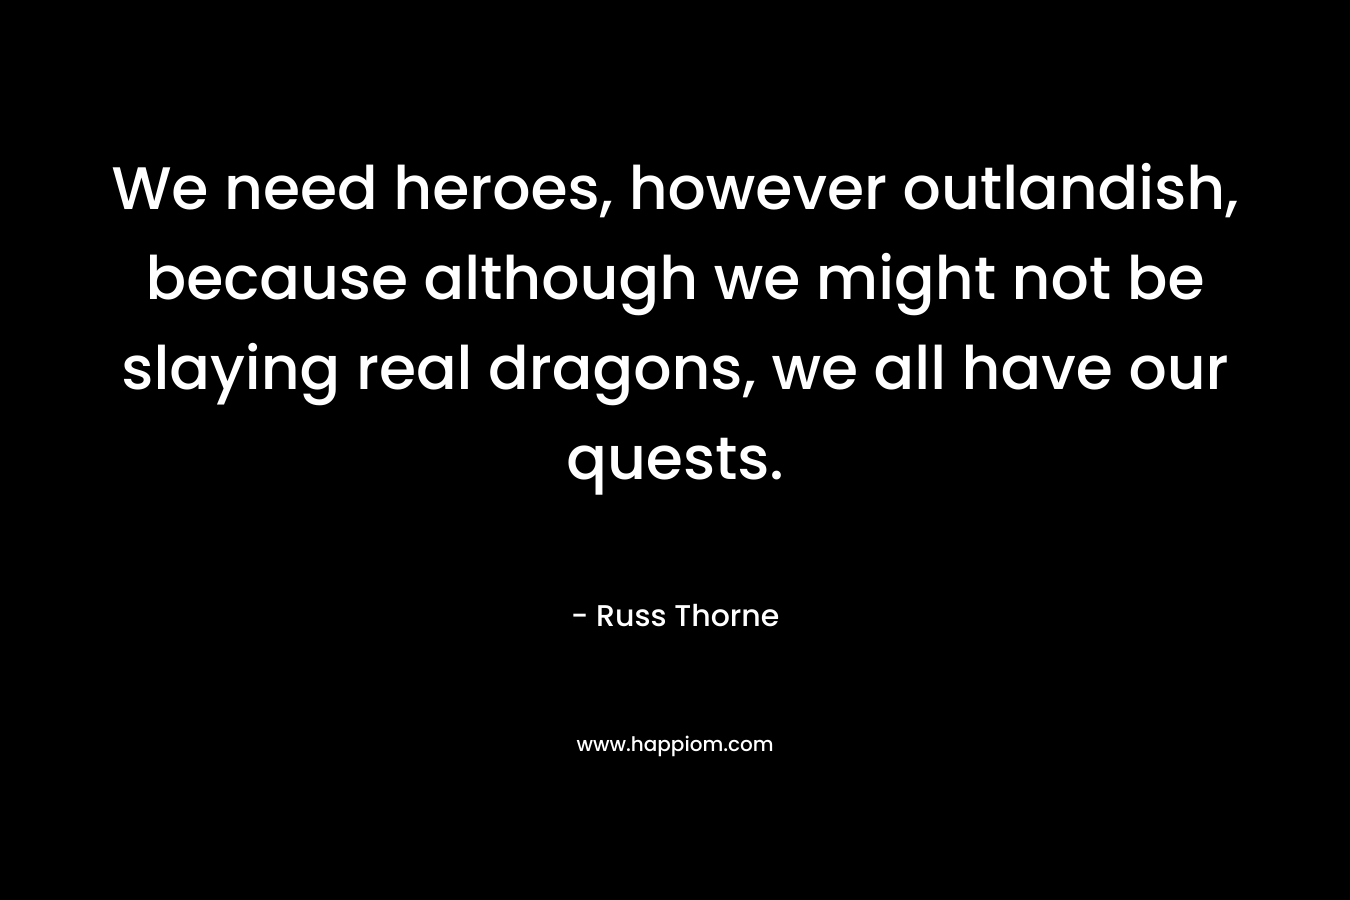 We need heroes, however outlandish, because although we might not be slaying real dragons, we all have our quests.